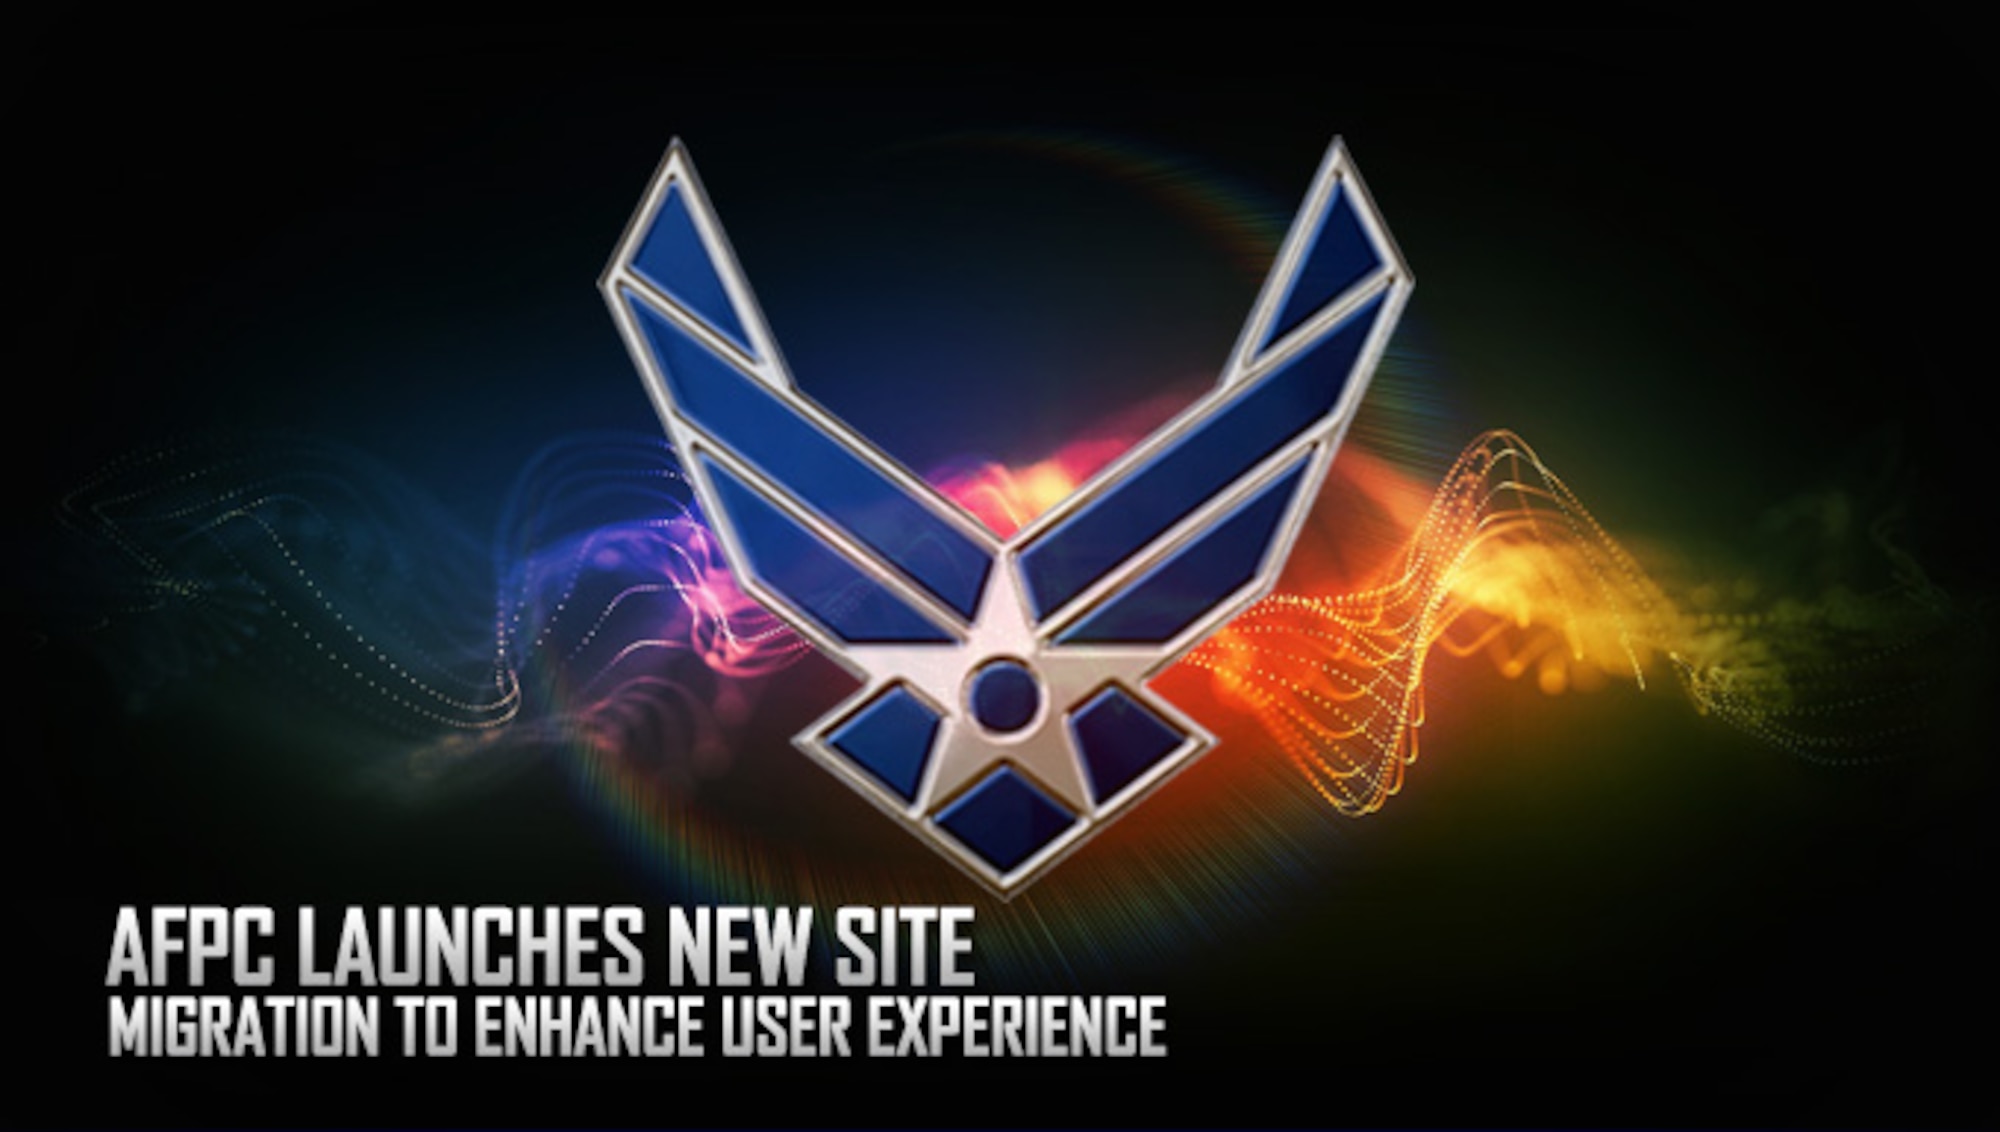 The Air Force Personnel Center website has a new look and feel thanks to improved web management software. The upgrade includes increased visual appeal, improved search sorting mechanisms and streamlined interfacing for users. (AFPC courtesy graphic)